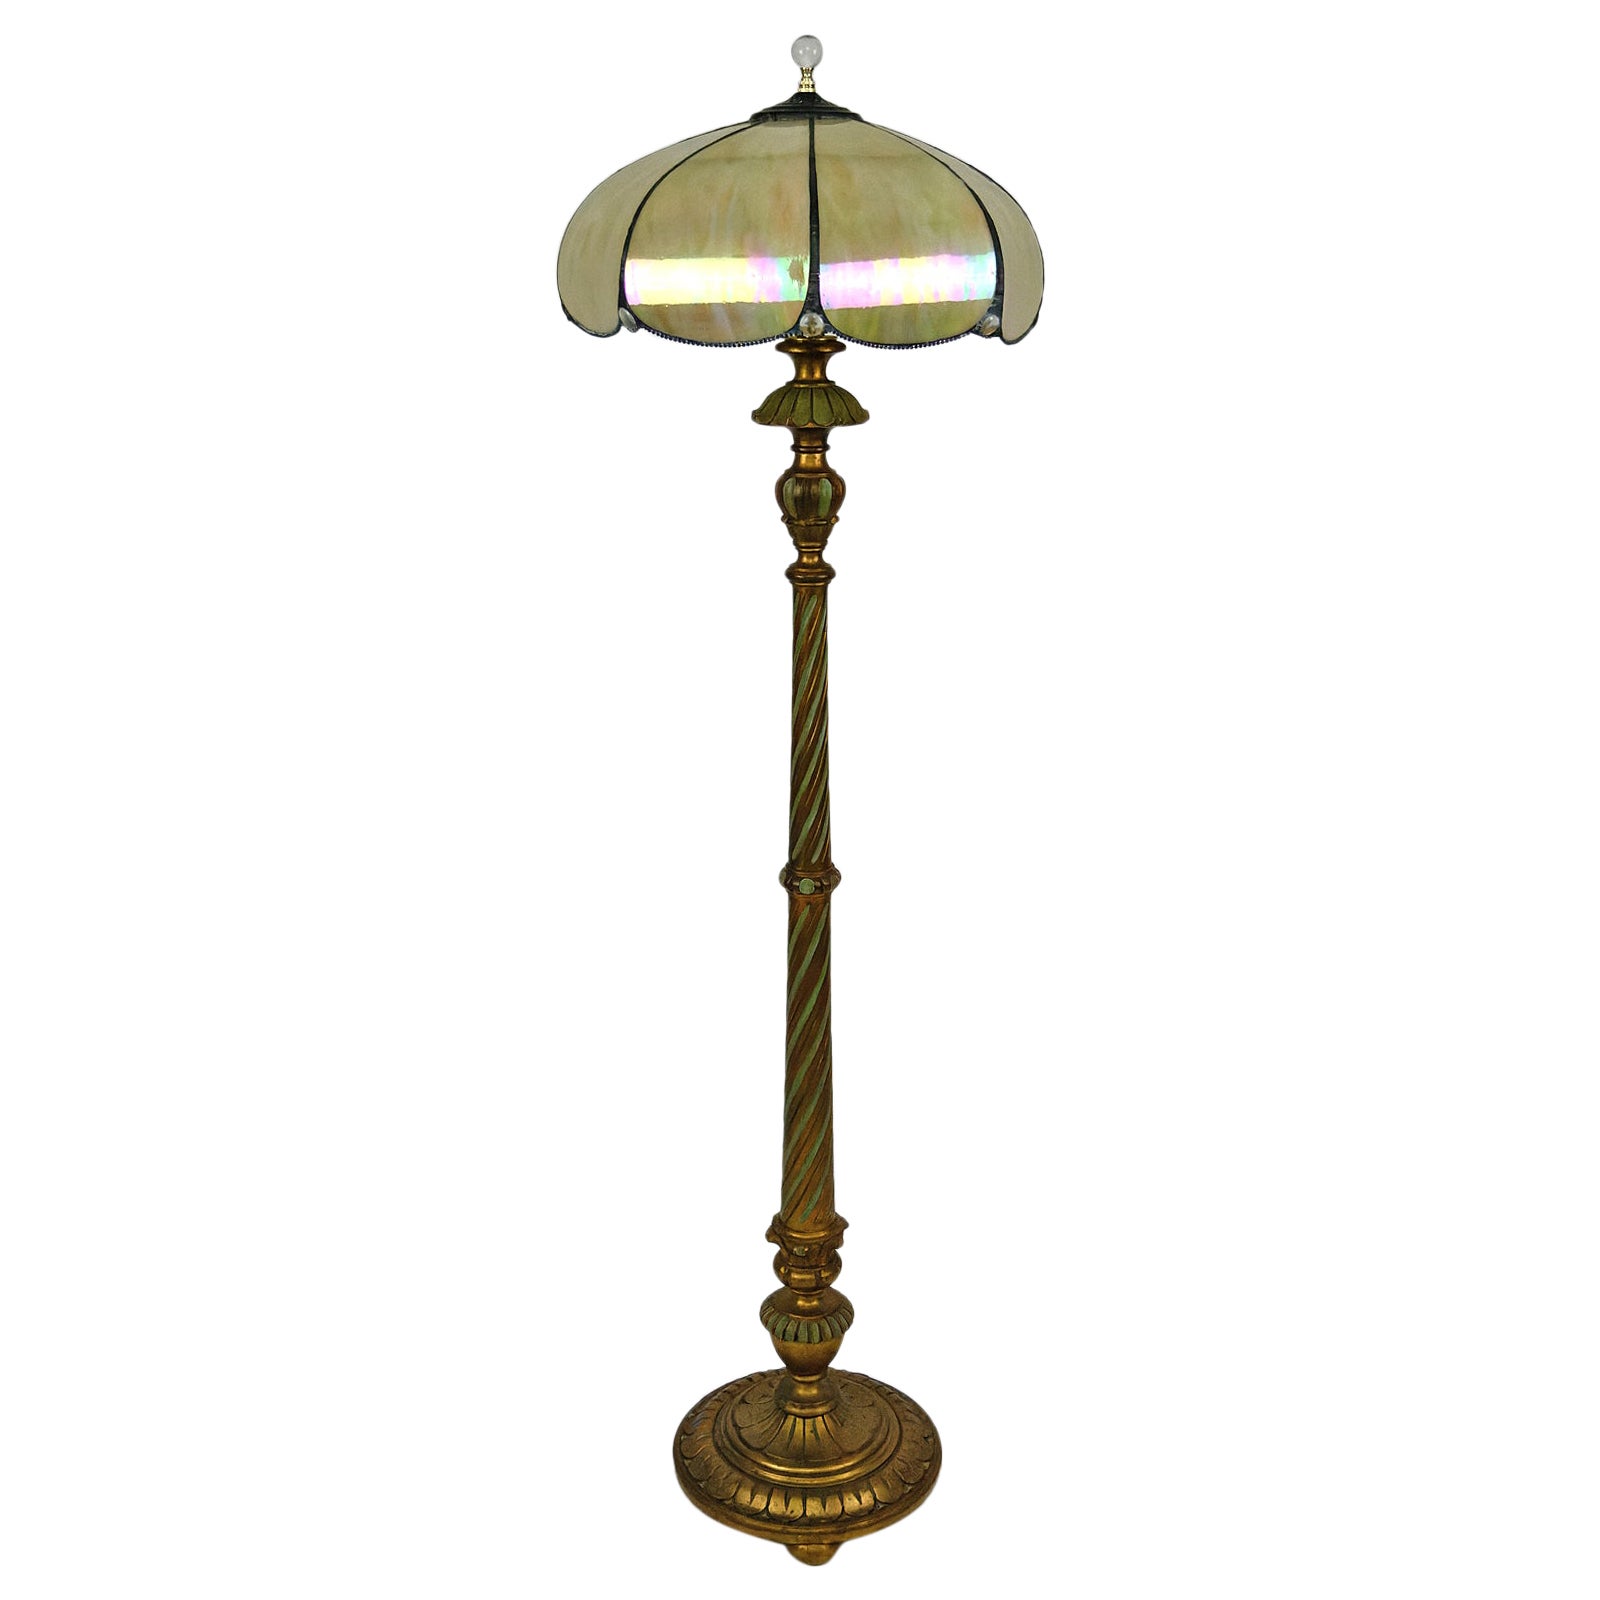 Floor lamp in gilded carved wood and pearly glass lampshade, Art Deco, 1920's